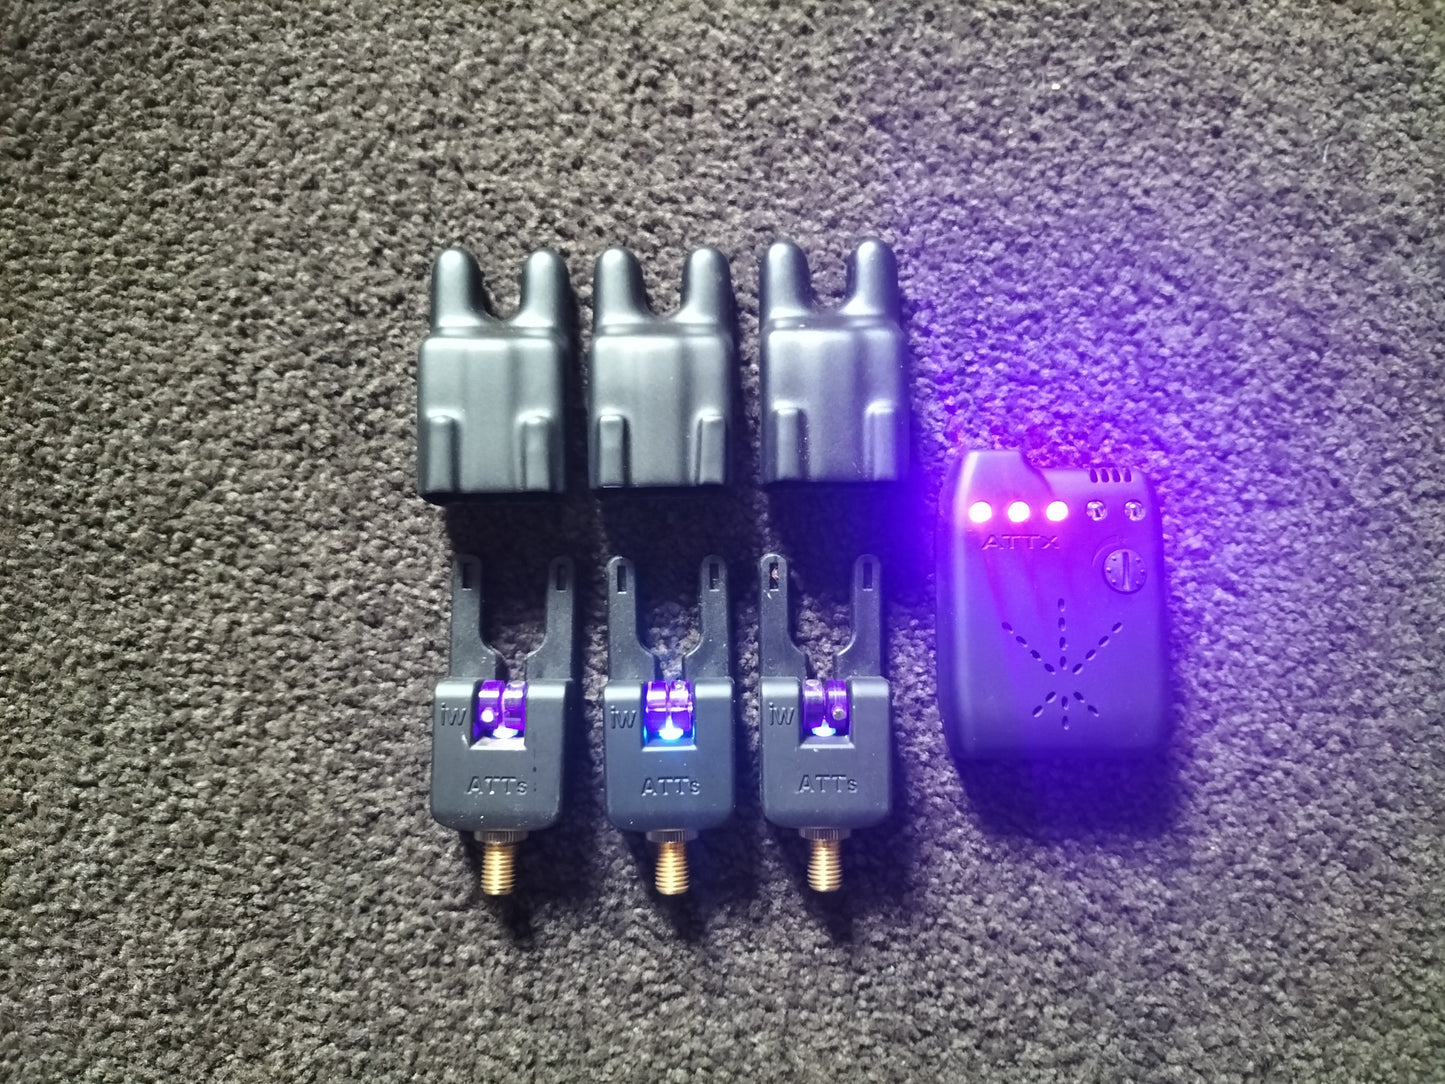 Gardner AttS Purple Underlit Alarms with Receiver x 3 with upgrades Used